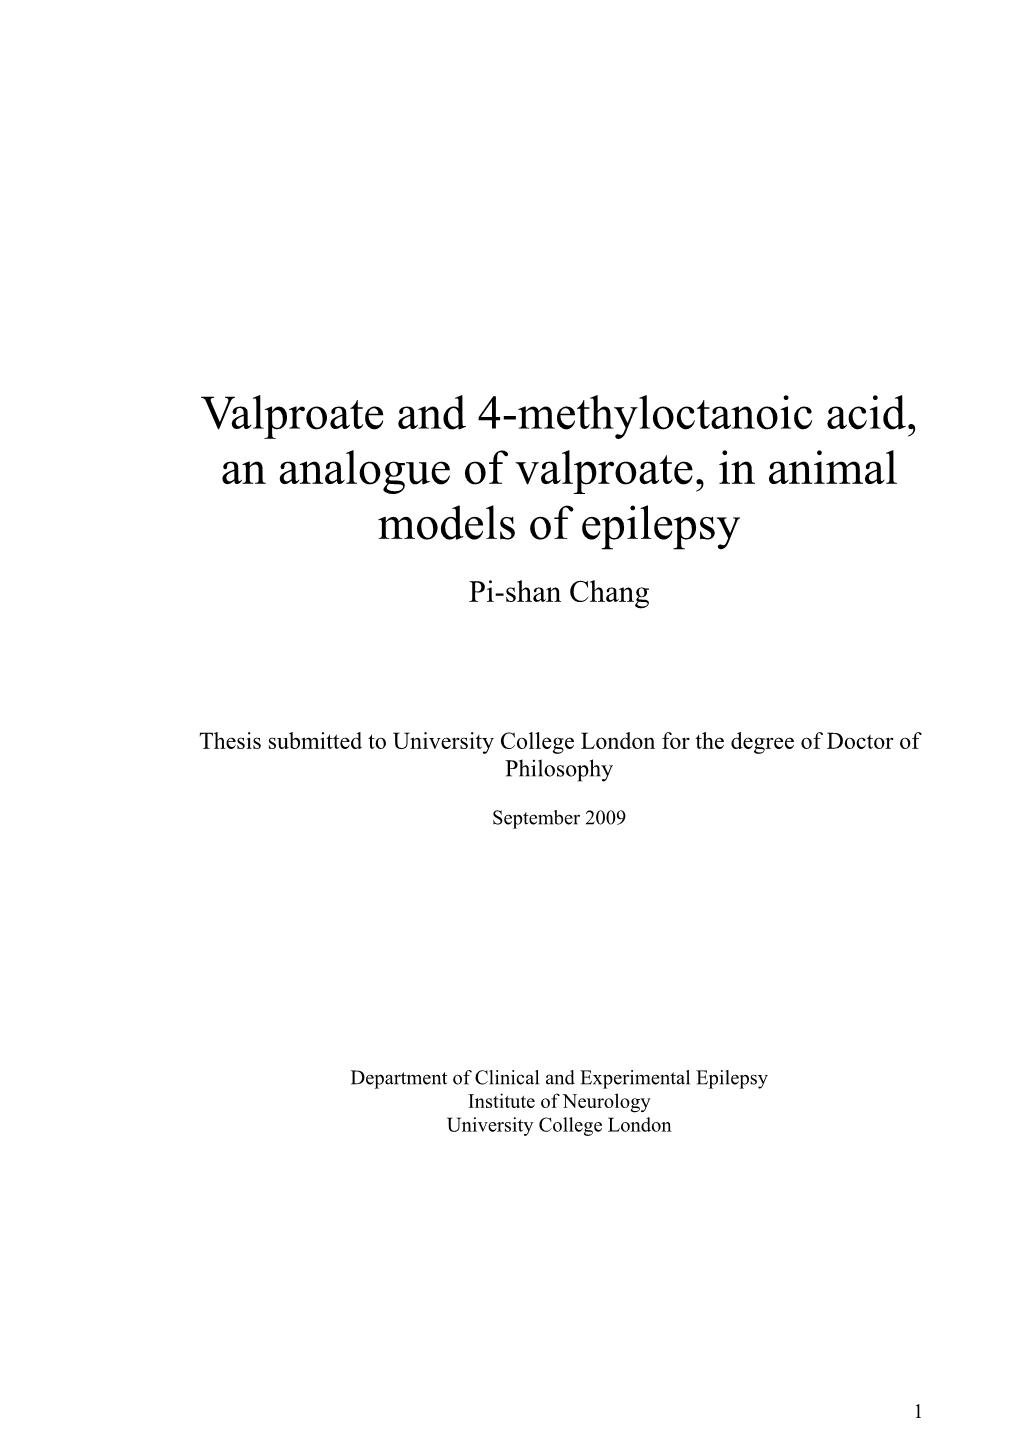 Valproate and 4-Methyloctanoic Acid, an Analogue of Valproate, in Animal Models of Epilepsy